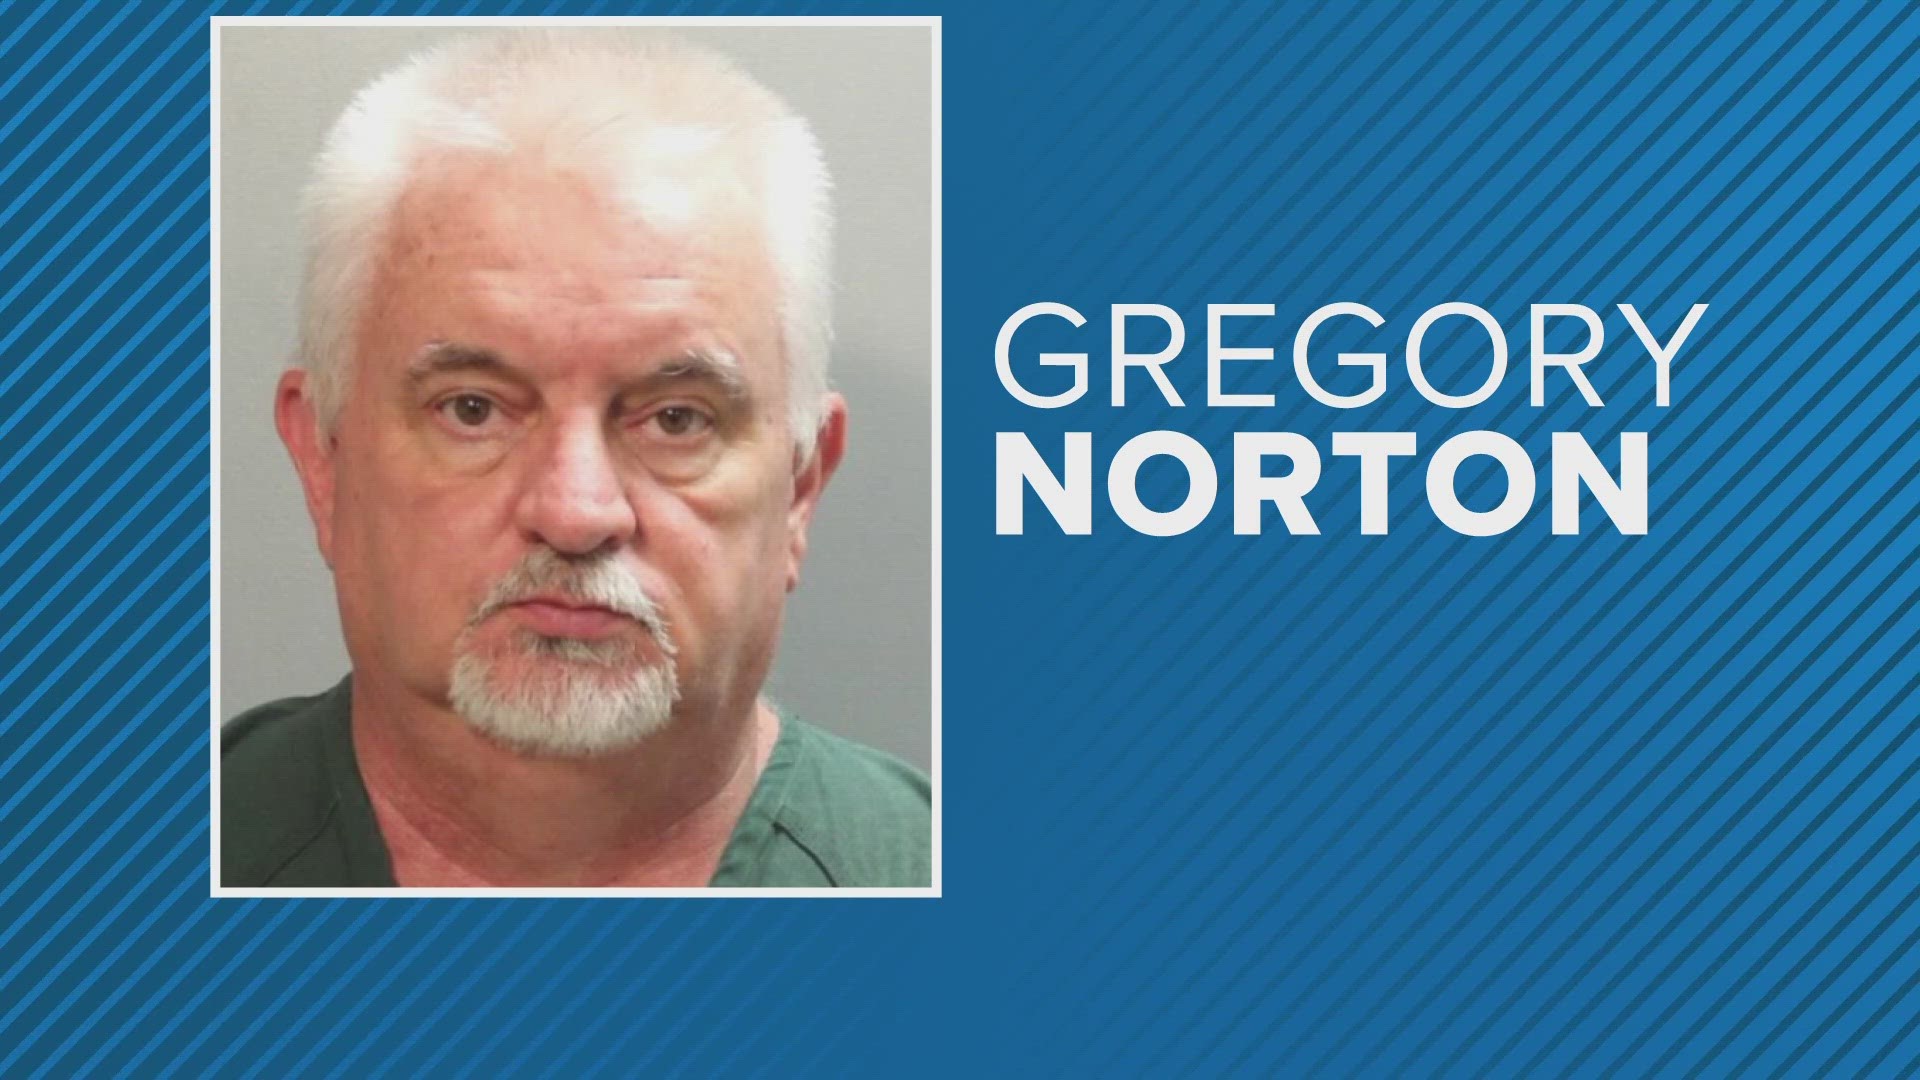 Police said Gregory Norton died of a "continuing medical issue."